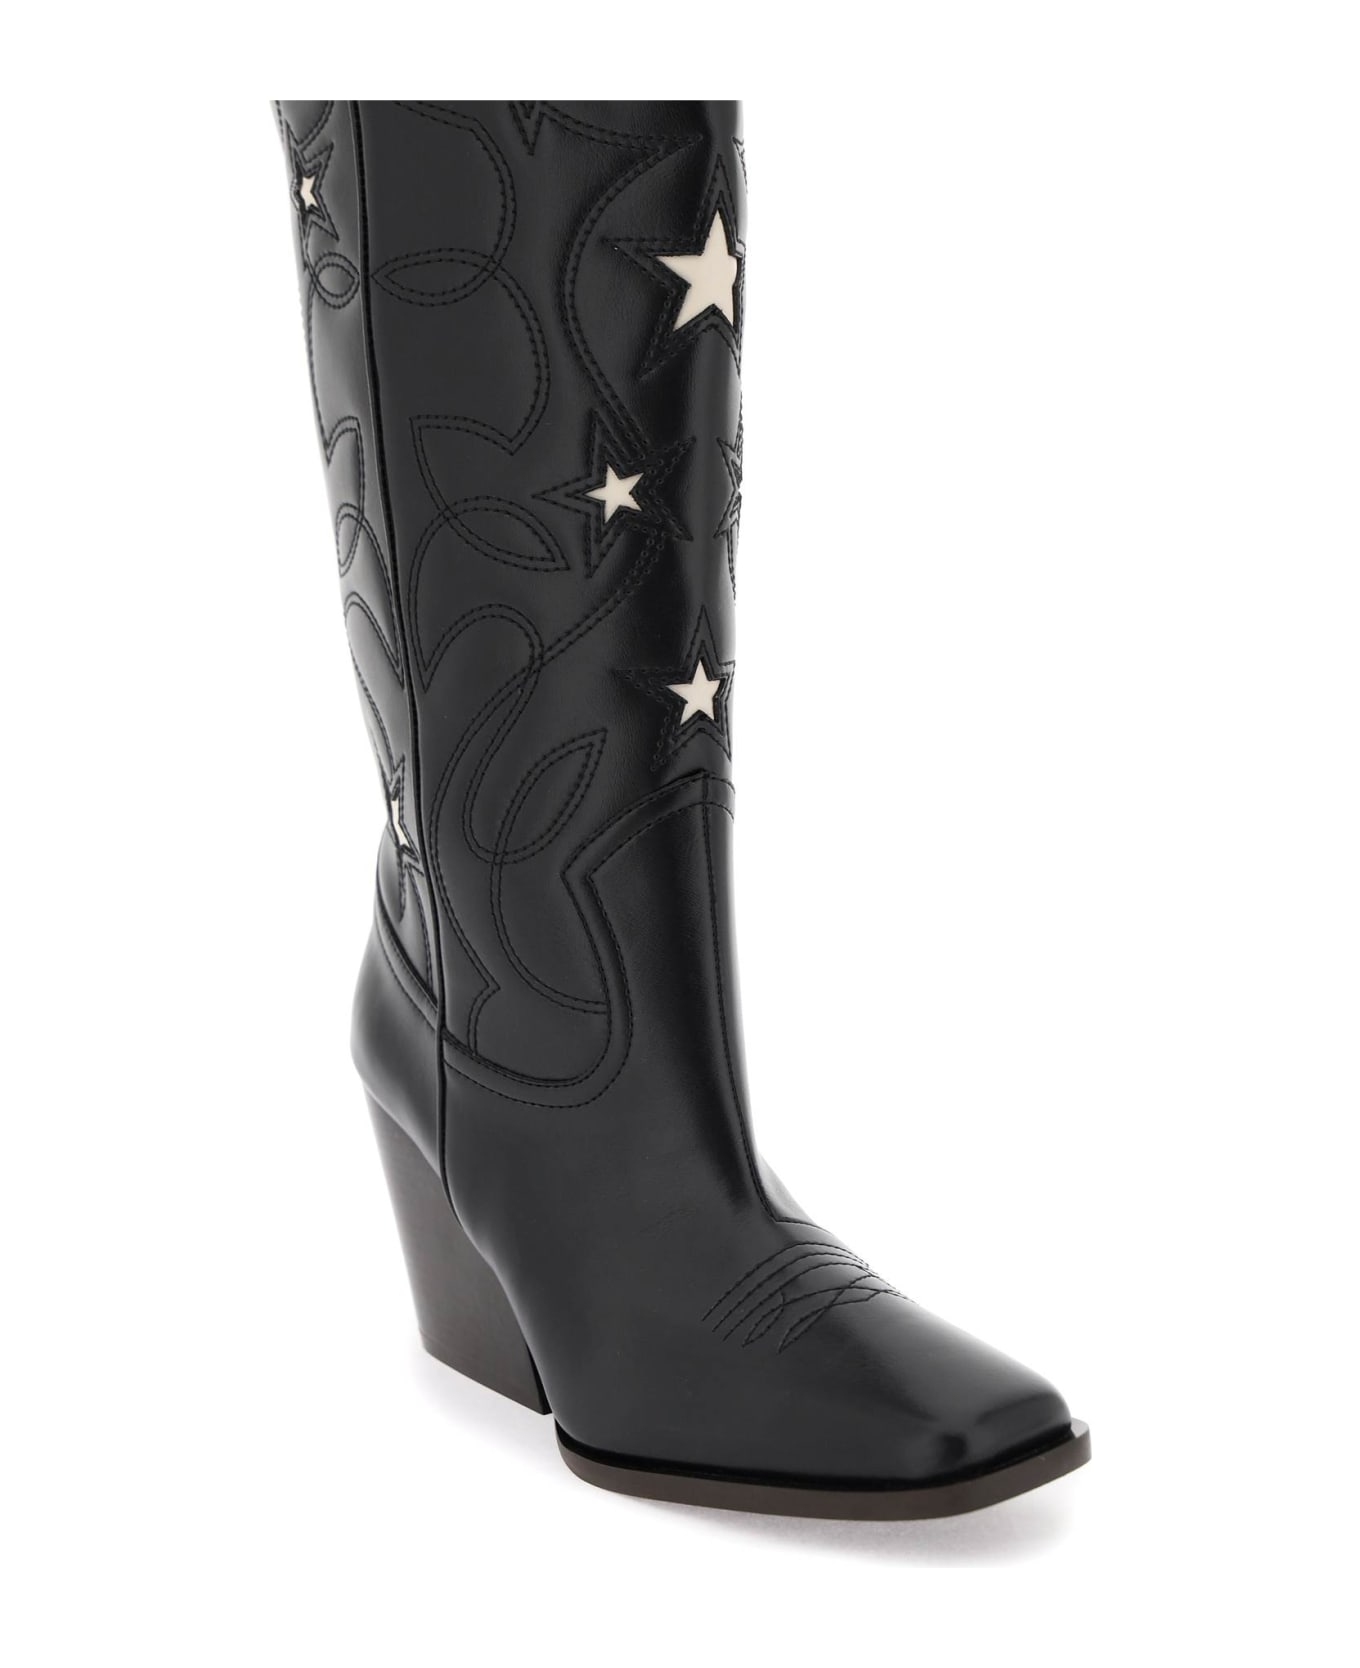 Stella McCartney Texan Boots With Star Embroidery - BLACK STONE (Black) ブーツ